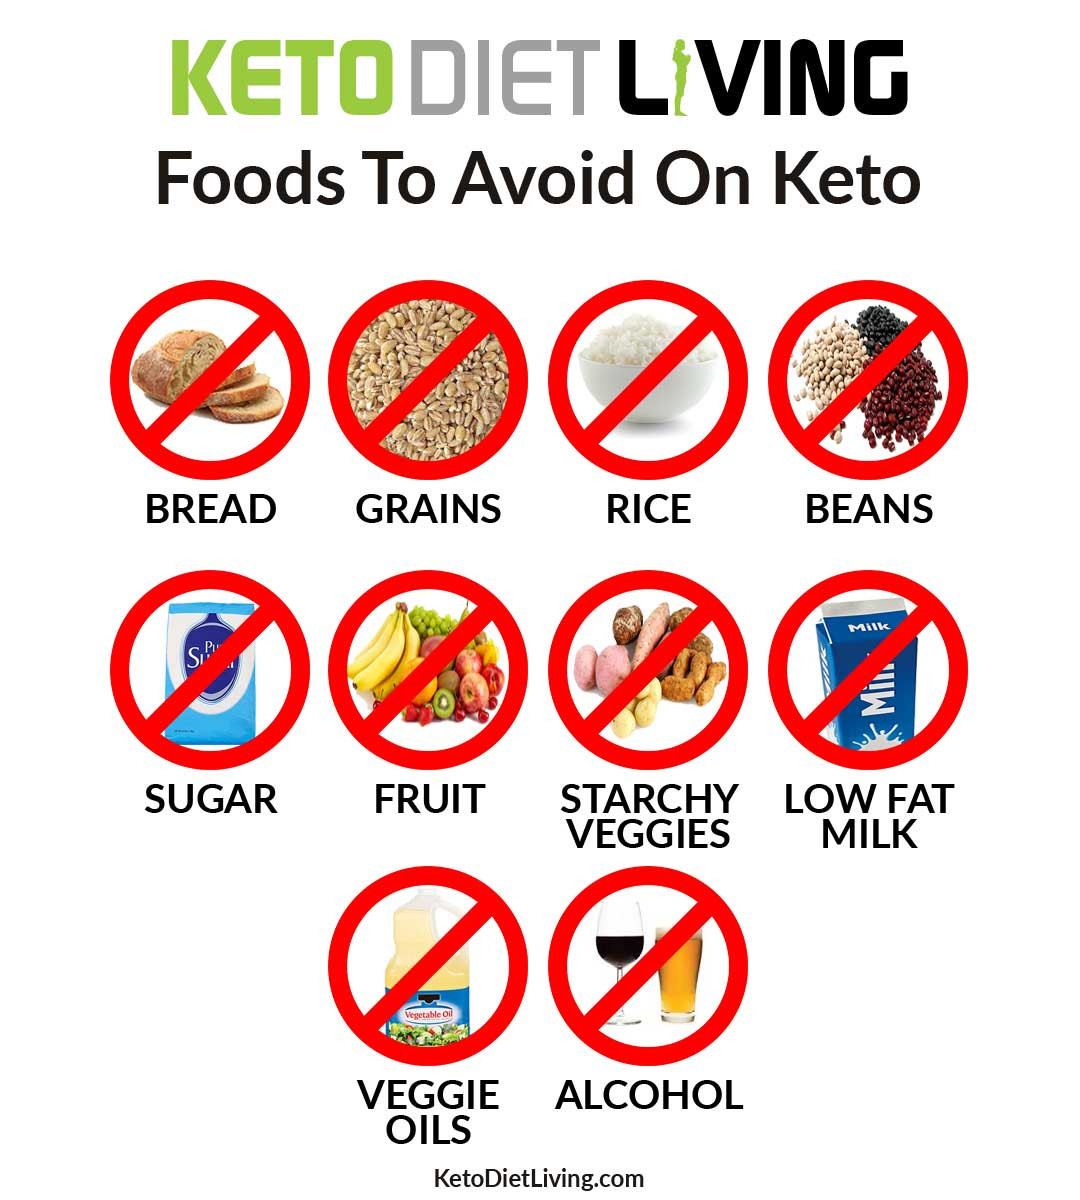 Keto Diet Food List To Avoid
 How Many Carbs Should You Eat Each Day to Get Into Ketosis